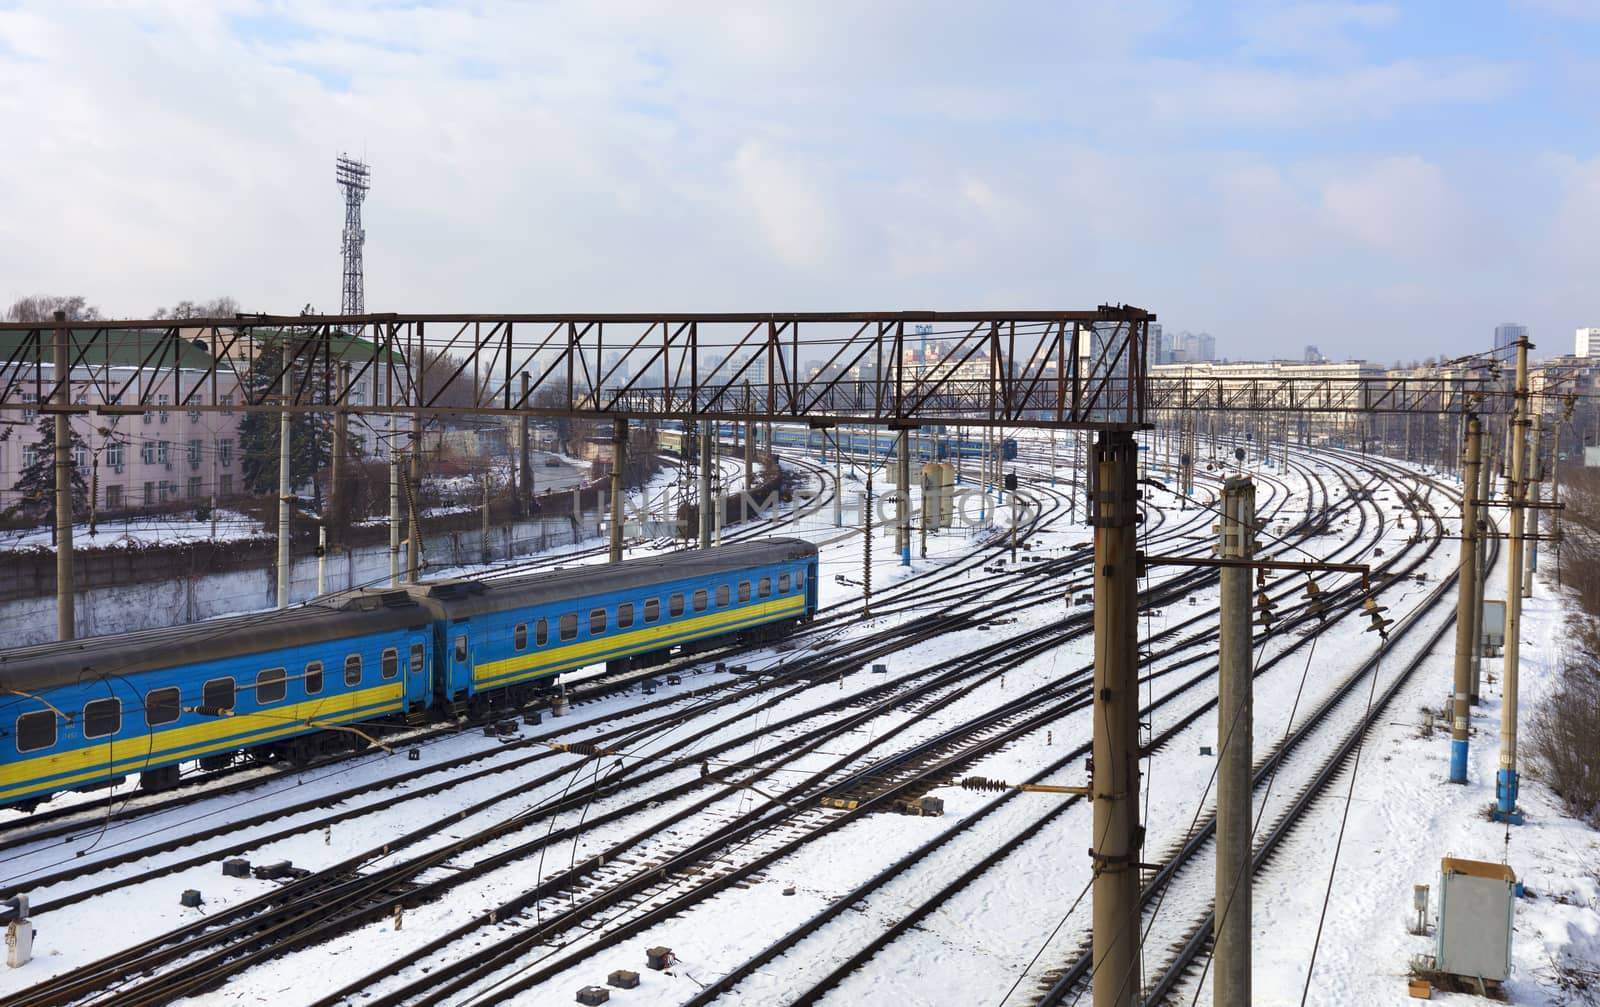 Passenger railway wagons ride along the railway tracks in the winter season against the backdrop of the cityscape by Sergii